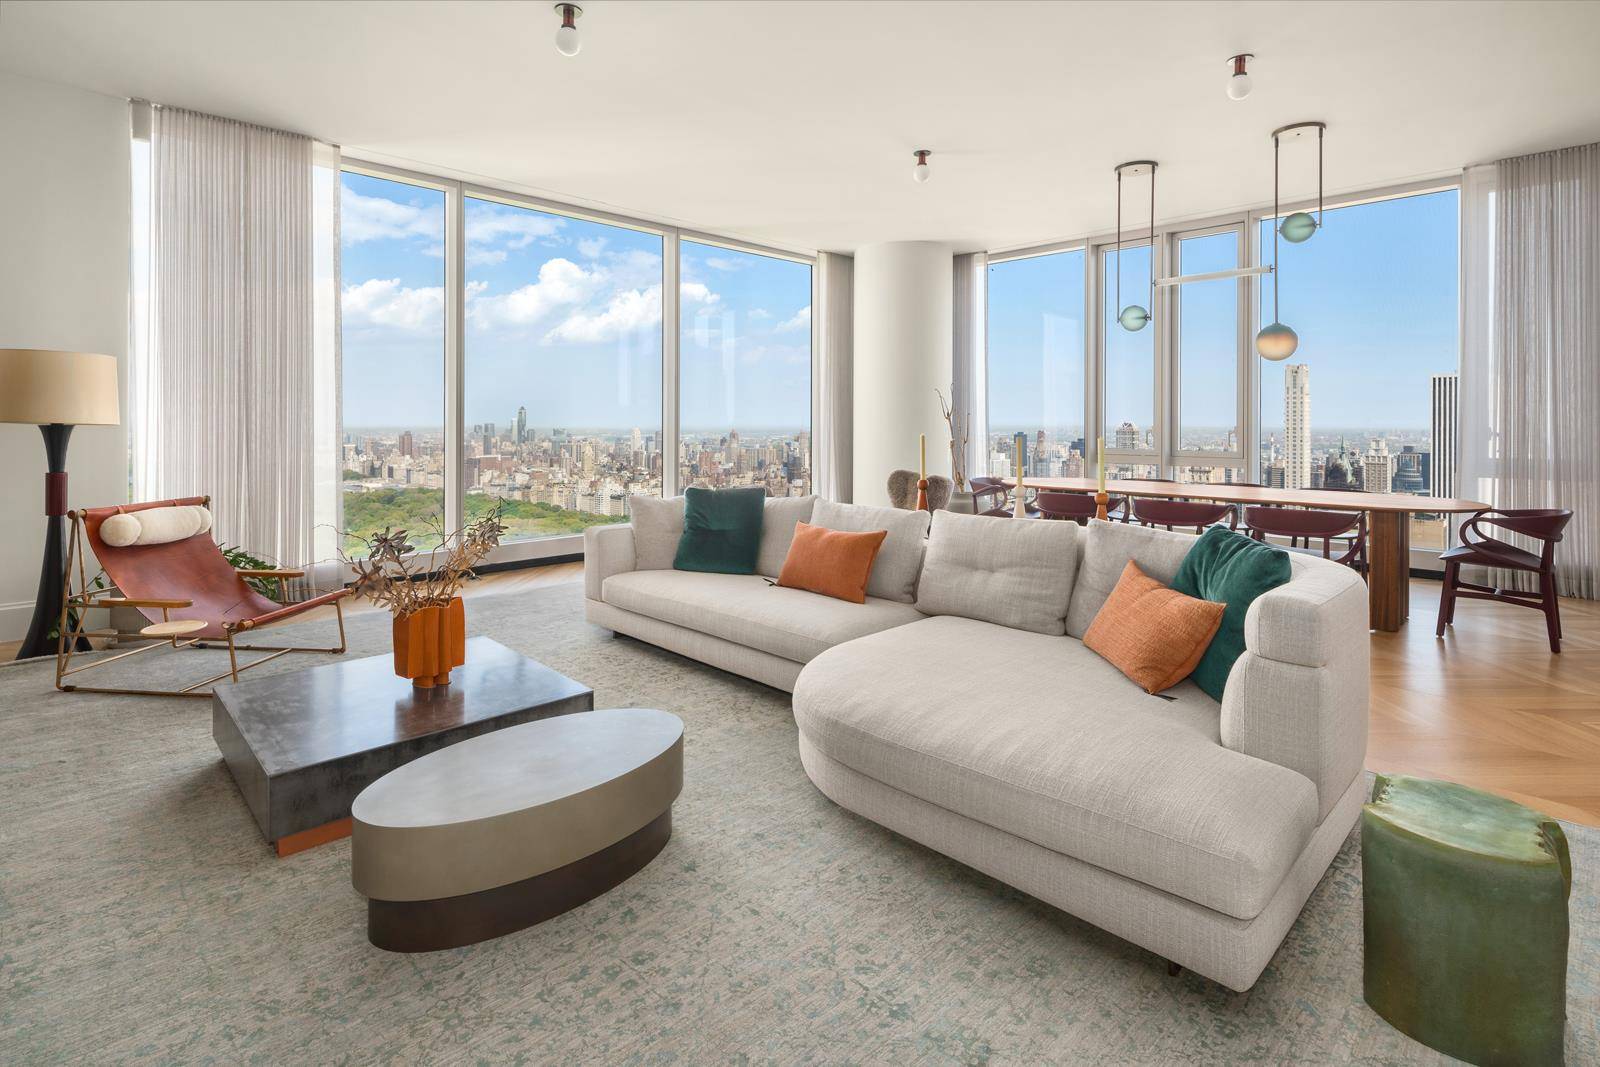 Experience breathtaking, unobstructed views of Central Park and Midtown from this meticulously designed three bedroom, three and a half bathroom residence.